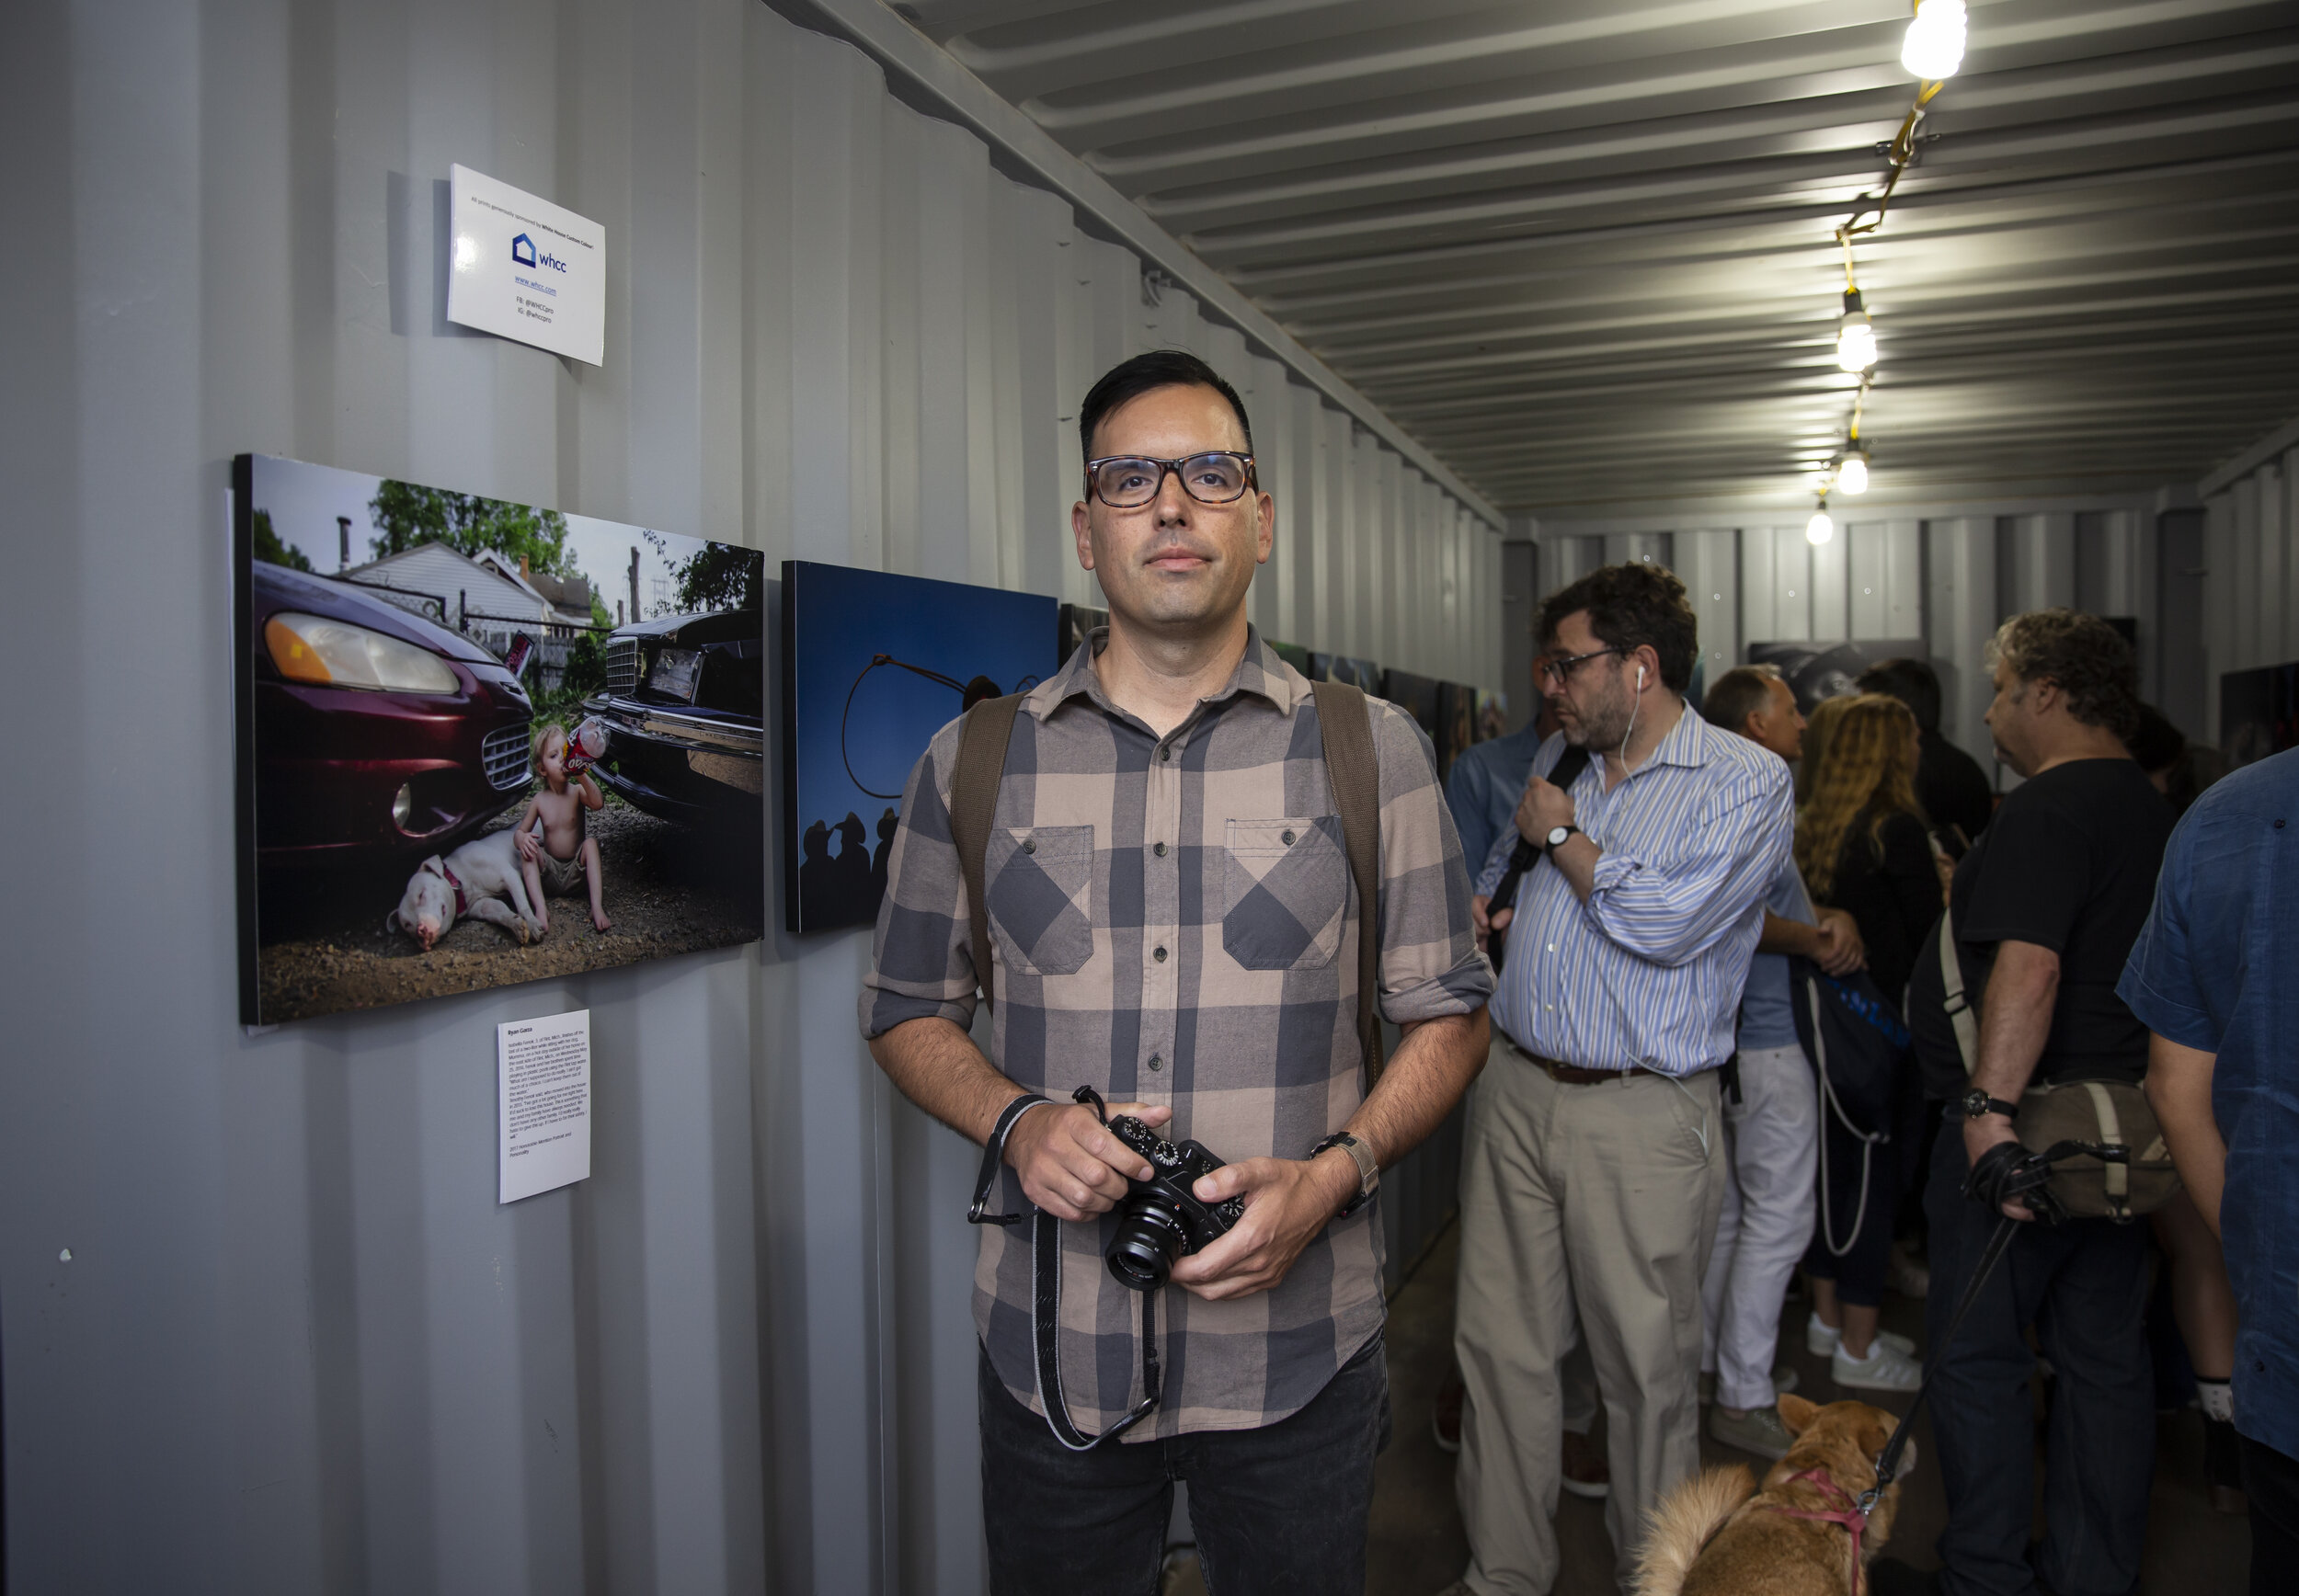  Pop Mod Photo co-owner Ryan Garza stands next to his documentary photo from coverage of the Flint Water Crisis on display as part of the National Press Photographers organizations first gallery at Photoville in Brooklyn, New York. 